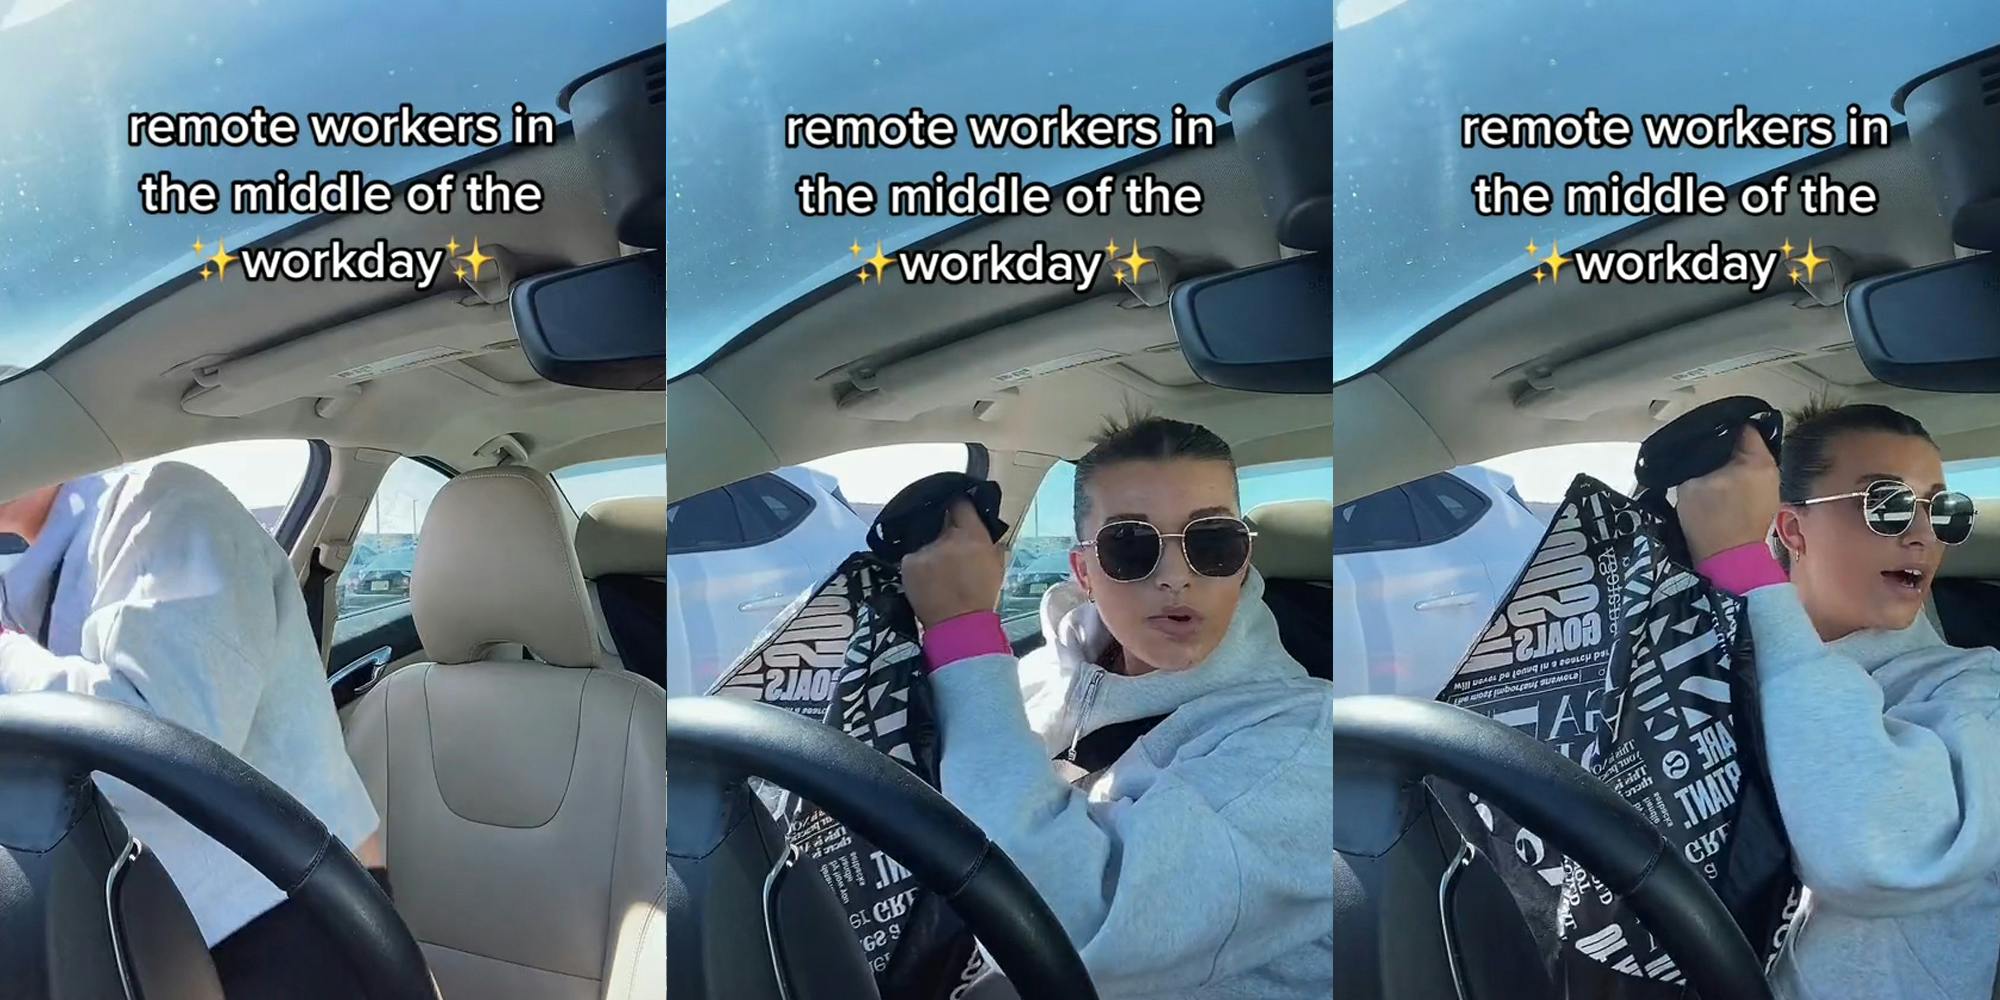 remote worker getting into car with caption "remote workers in the middle of the day" (l) remote worker getting into car holding bag with caption "remote workers in the middle of the day" (c) remote worker getting into car holding bag with caption "remote workers in the middle of the day" (r)